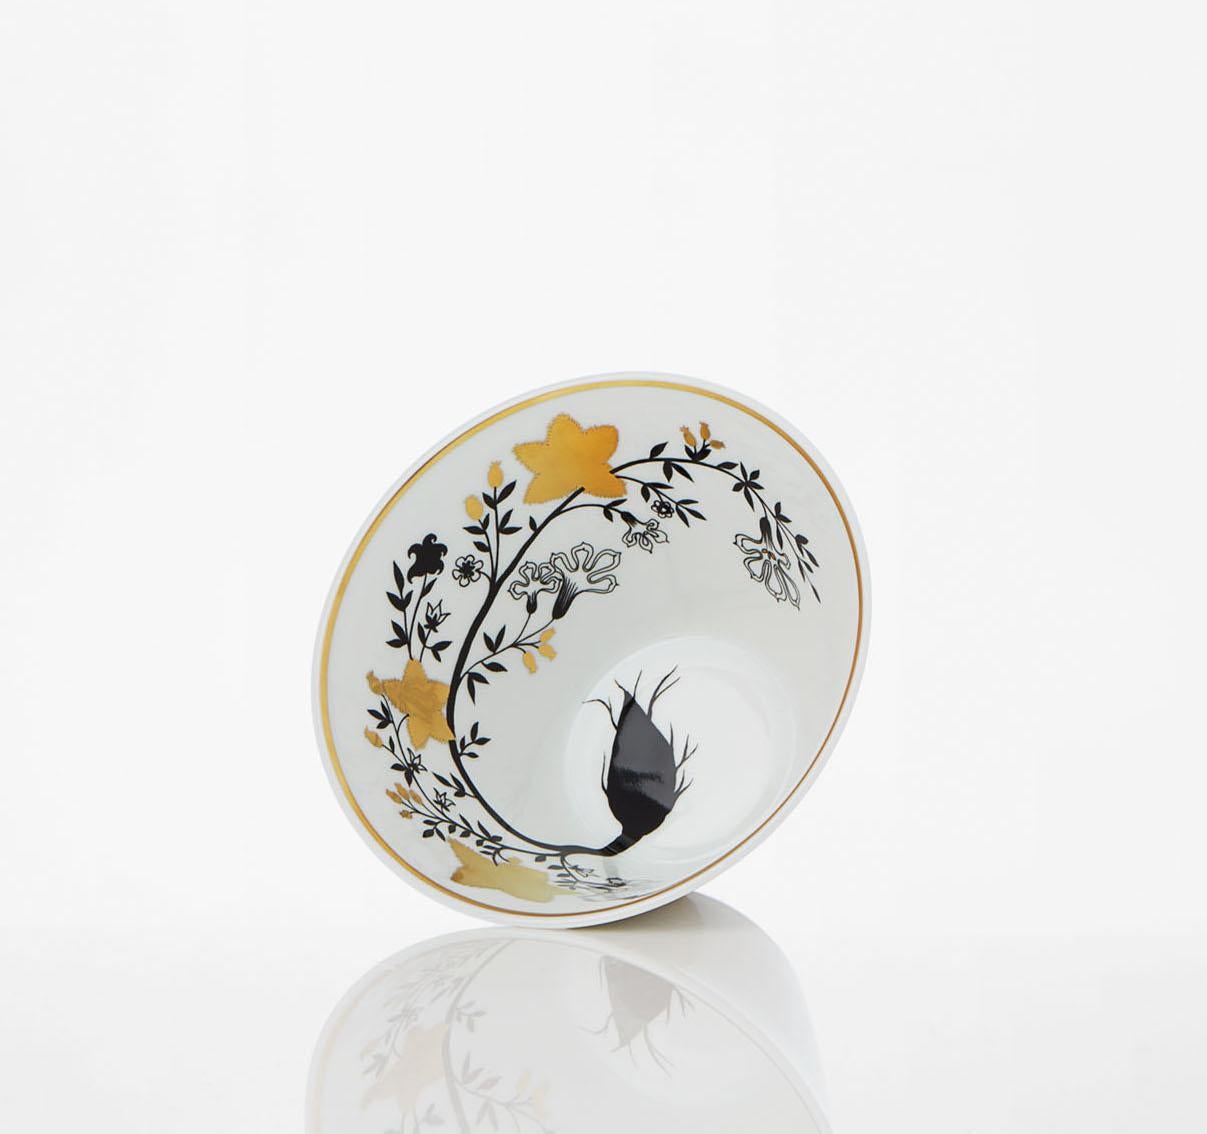 Safia Ouares, illustrator, interpreted her vison of nature on two cups. The first one : « Racines » (Roots), like the roots of the world.

Porcelain of Limoges extra fine.
Black and white serigraphy. 
Gold filet hand painting.
Diameter : 3.9